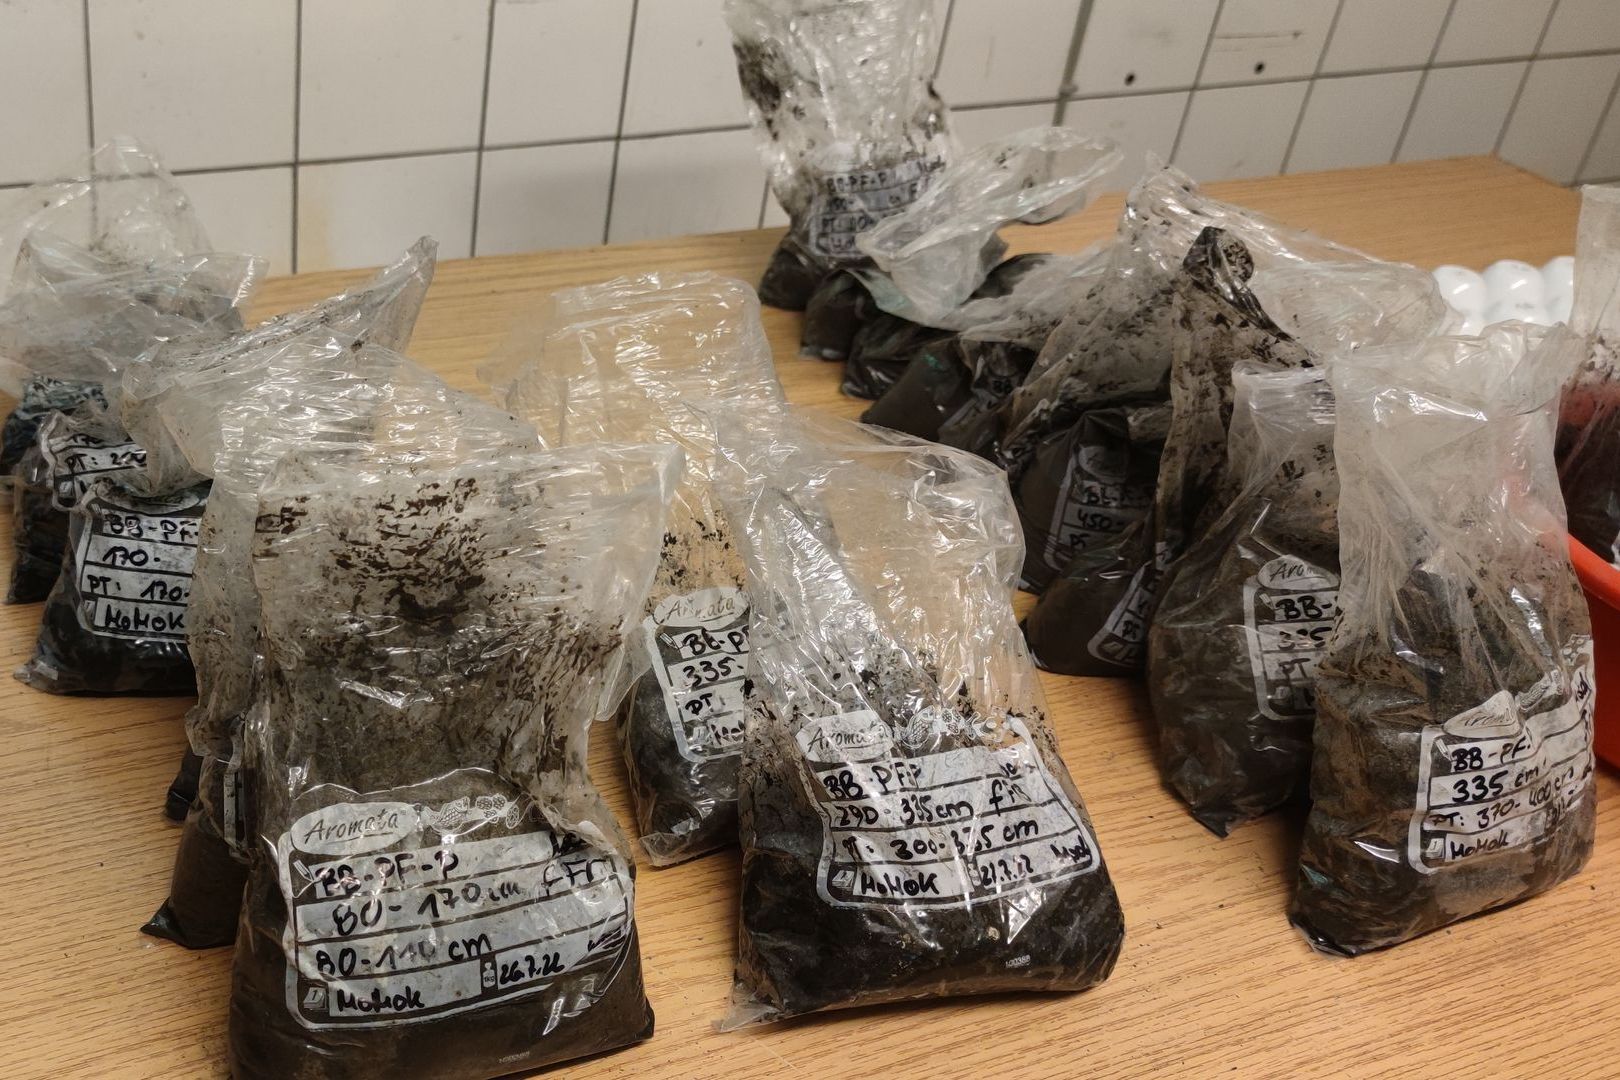 Several soil samples in labeled plastic bags on a table. The fresh mass has just come from the cold storage room.